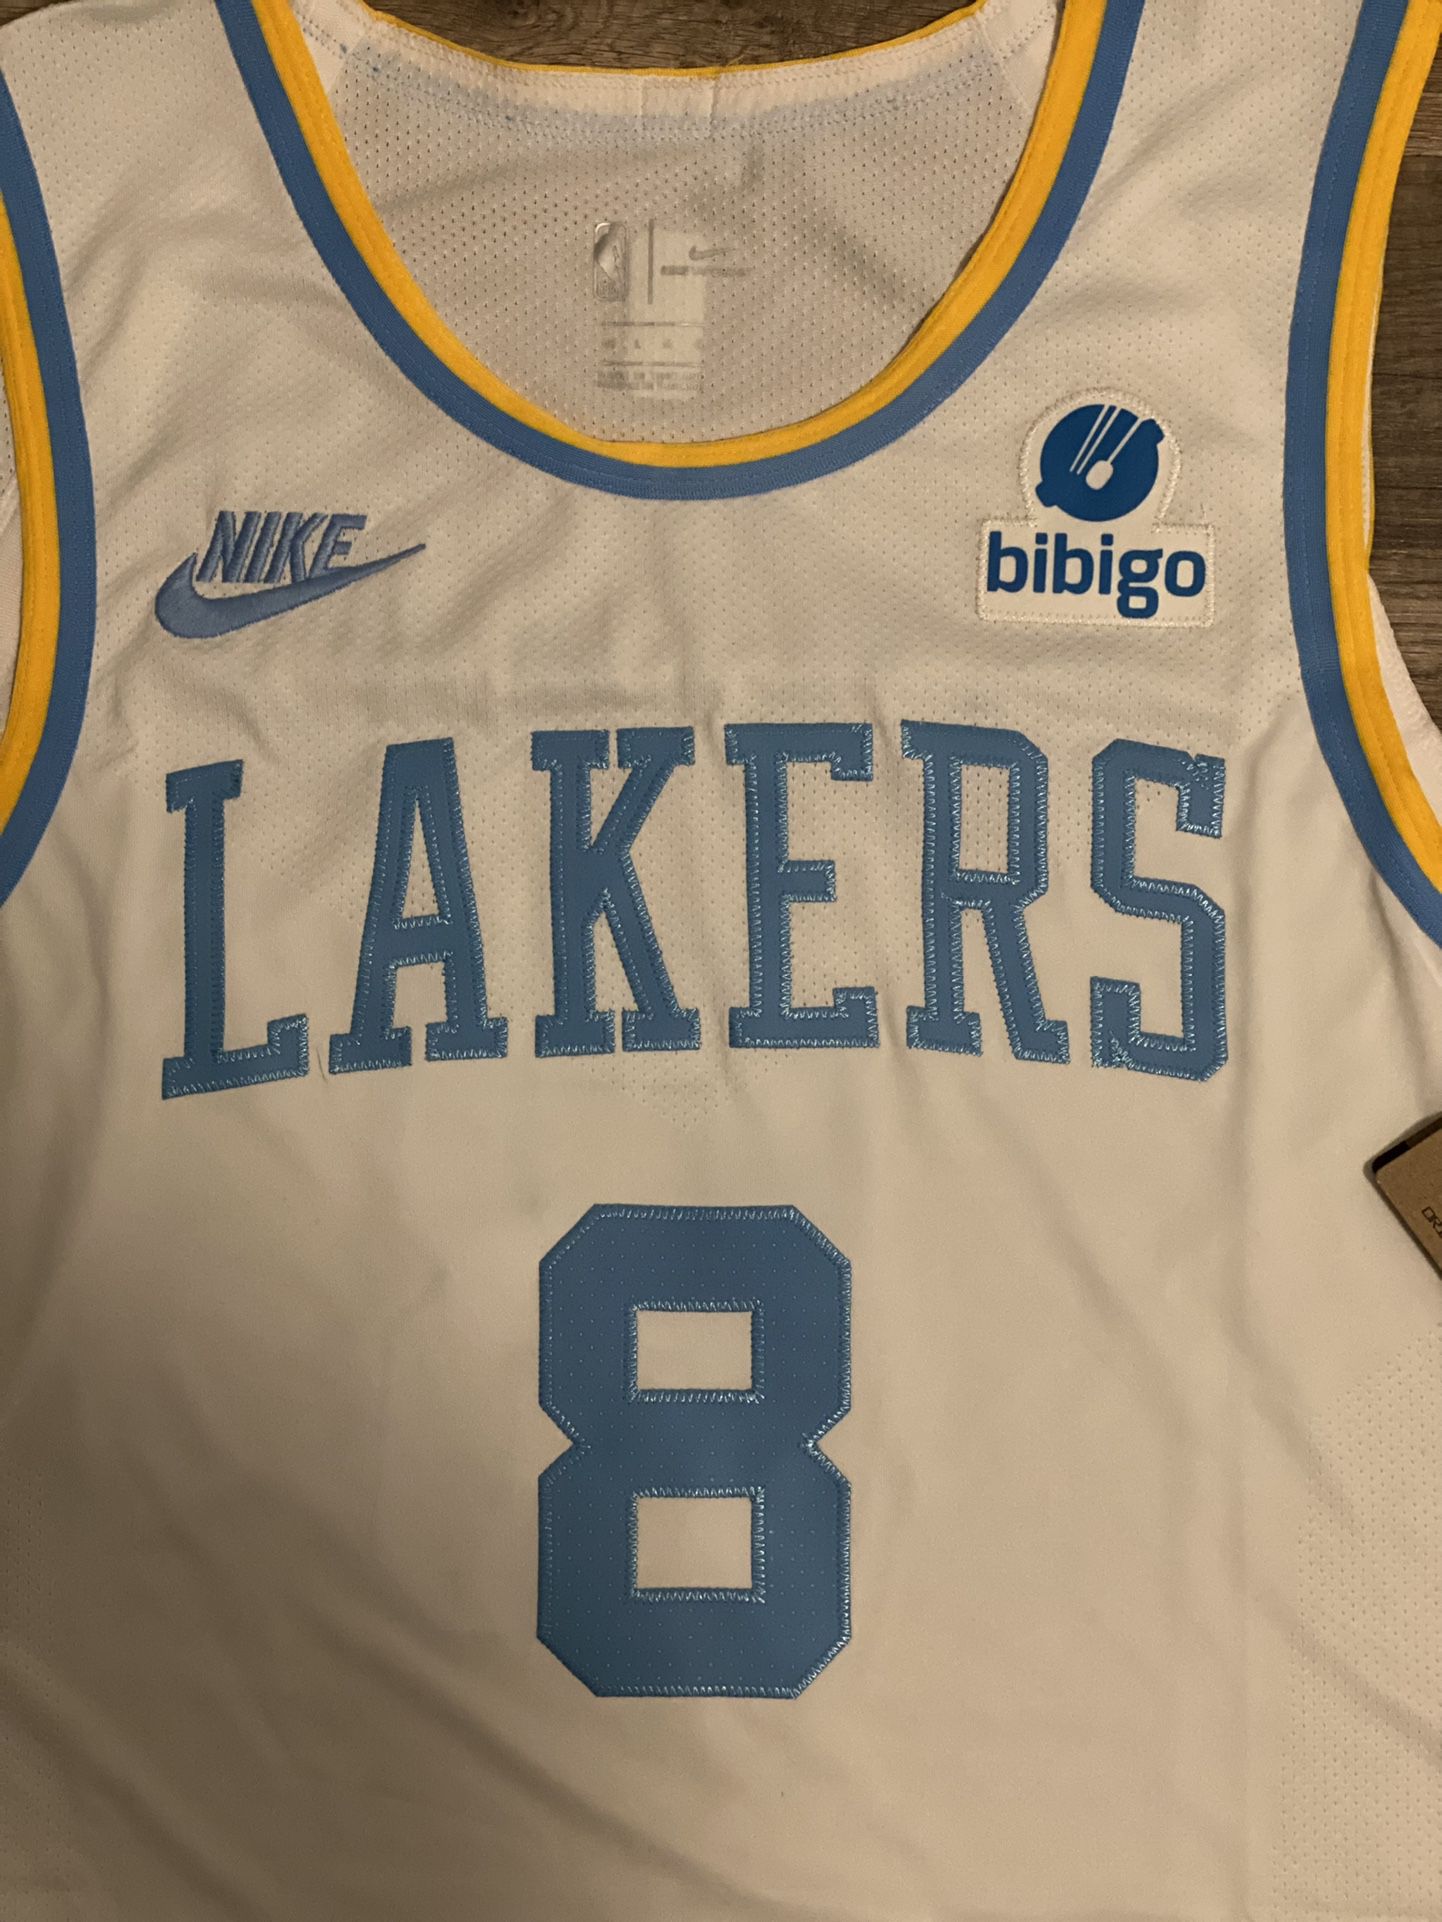 Kobe Bryant jersey #8 LIMITED EDITION/CLASSICS NBA for Sale in City of  Industry, CA - OfferUp